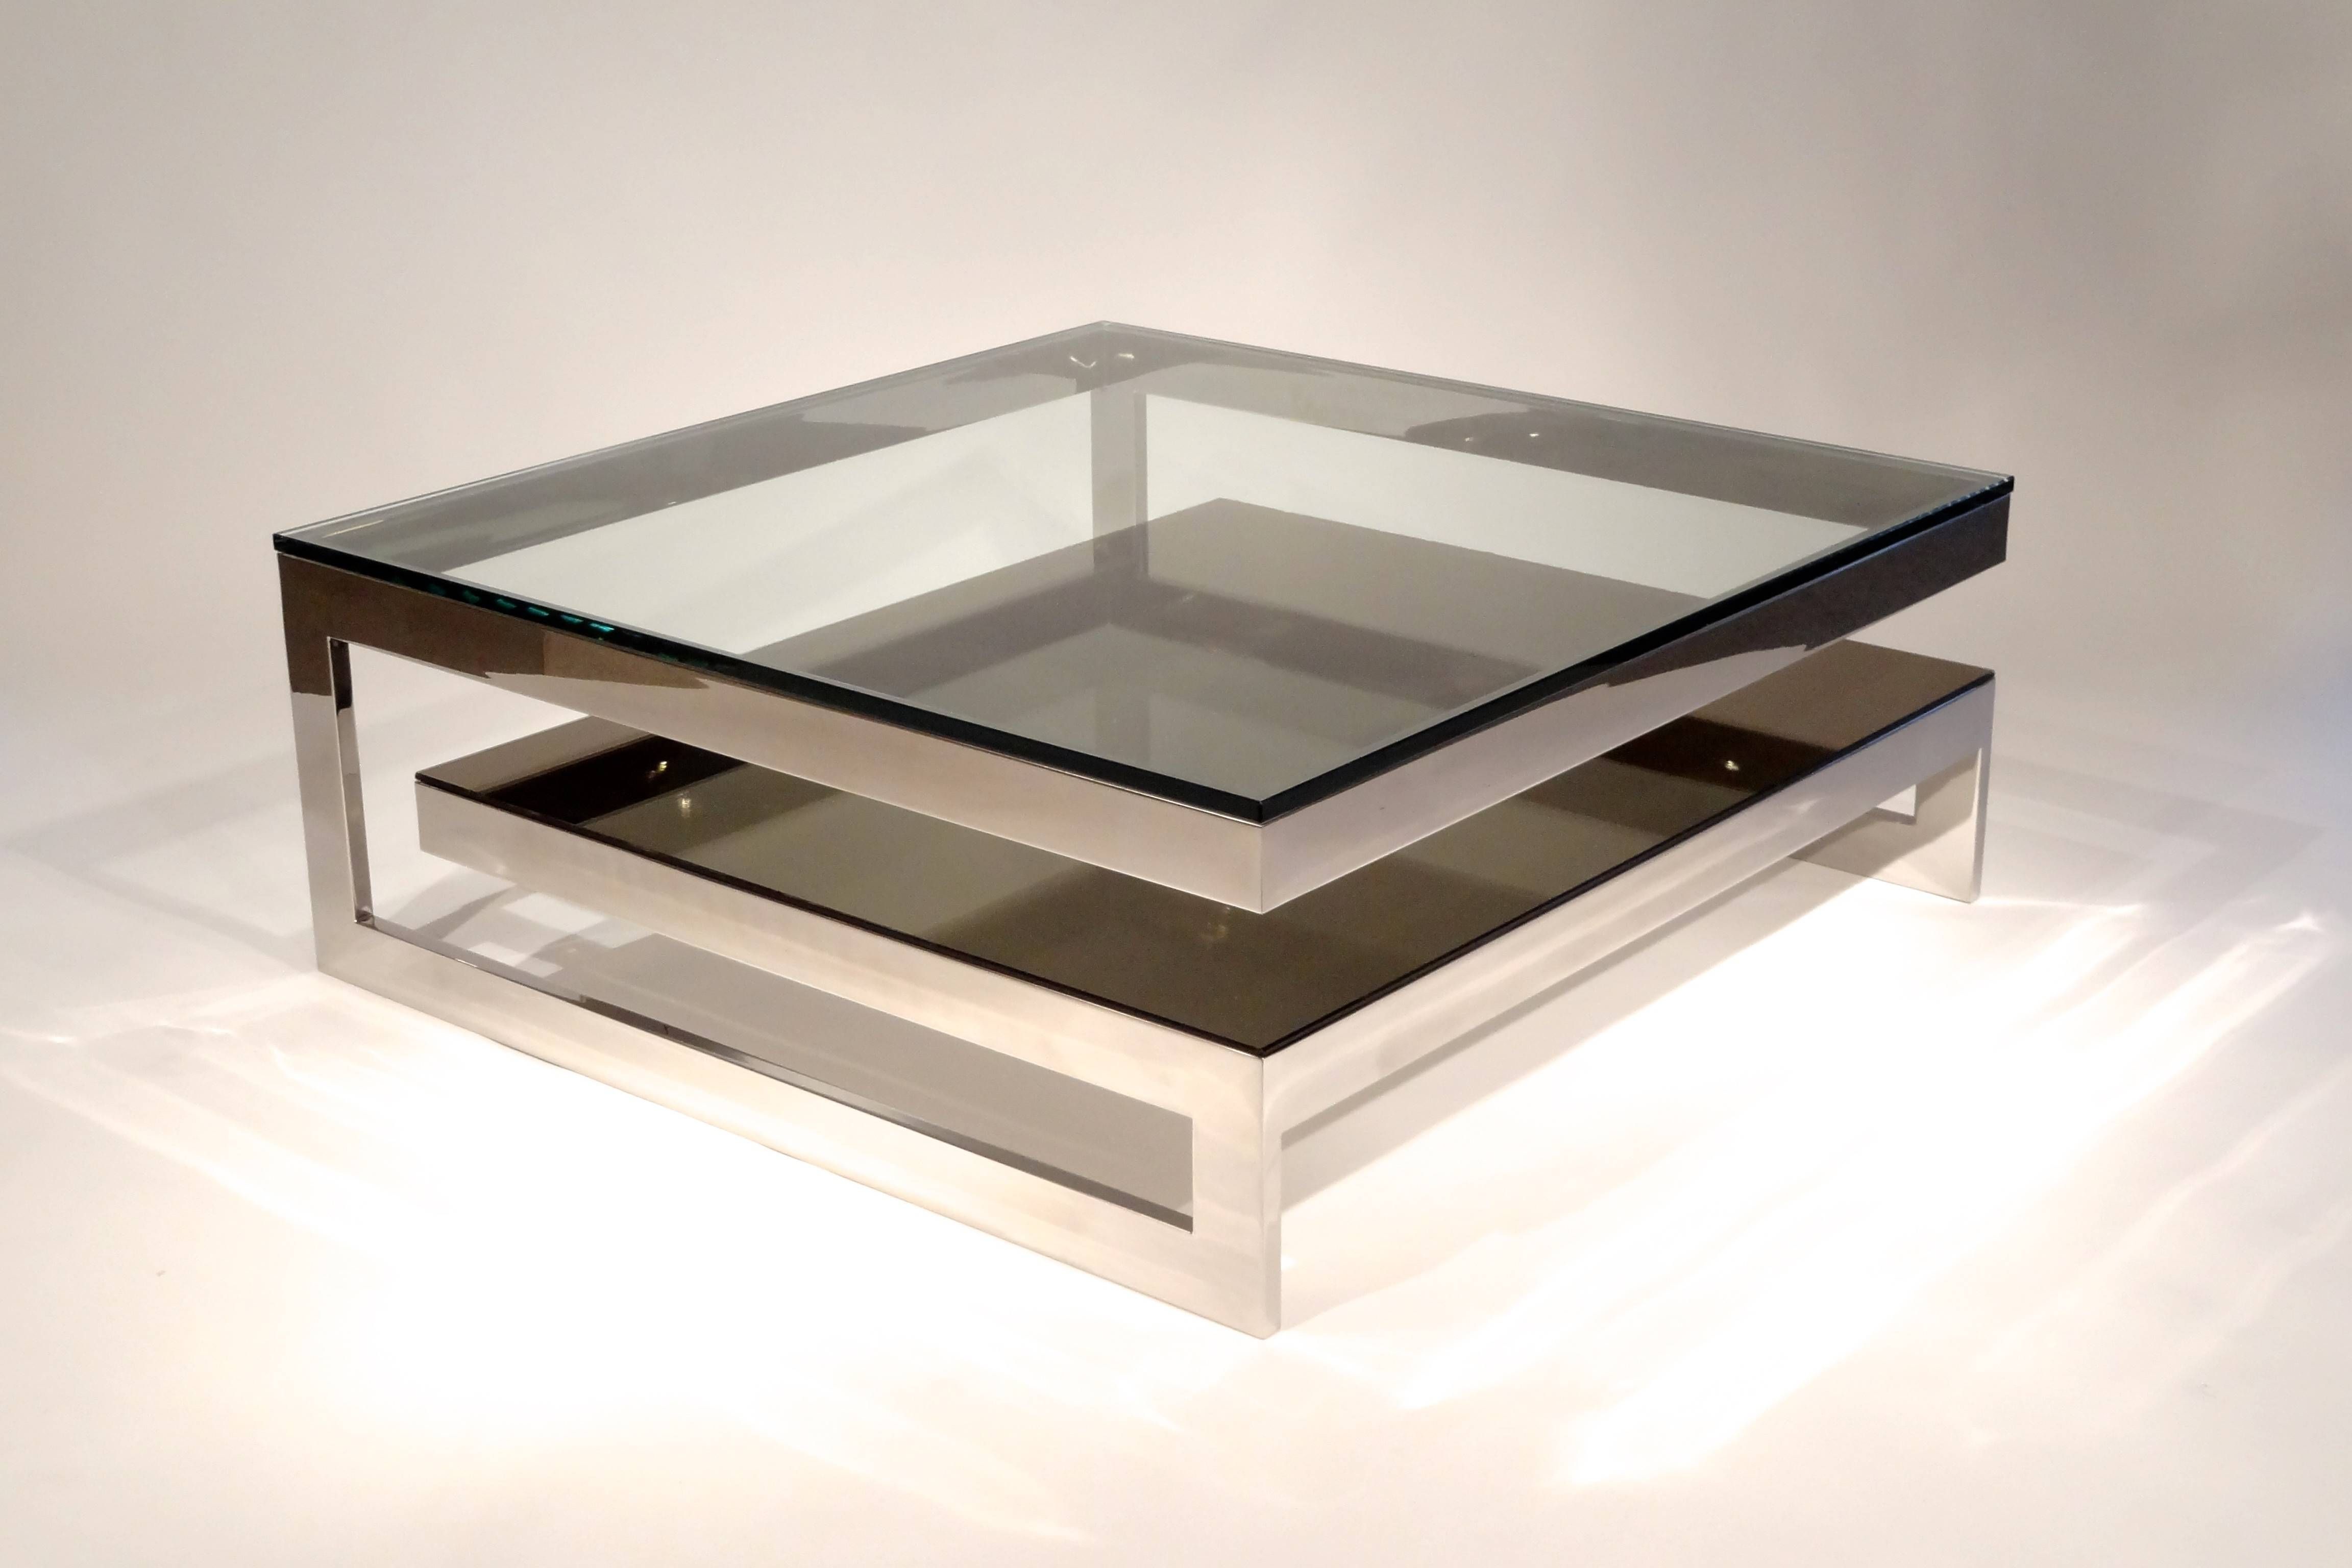 Sturdy Modern Glass Coffee Table Metal Legs Construction 4 Legs Intended For Chrome And Wood Coffee Tables (View 9 of 30)